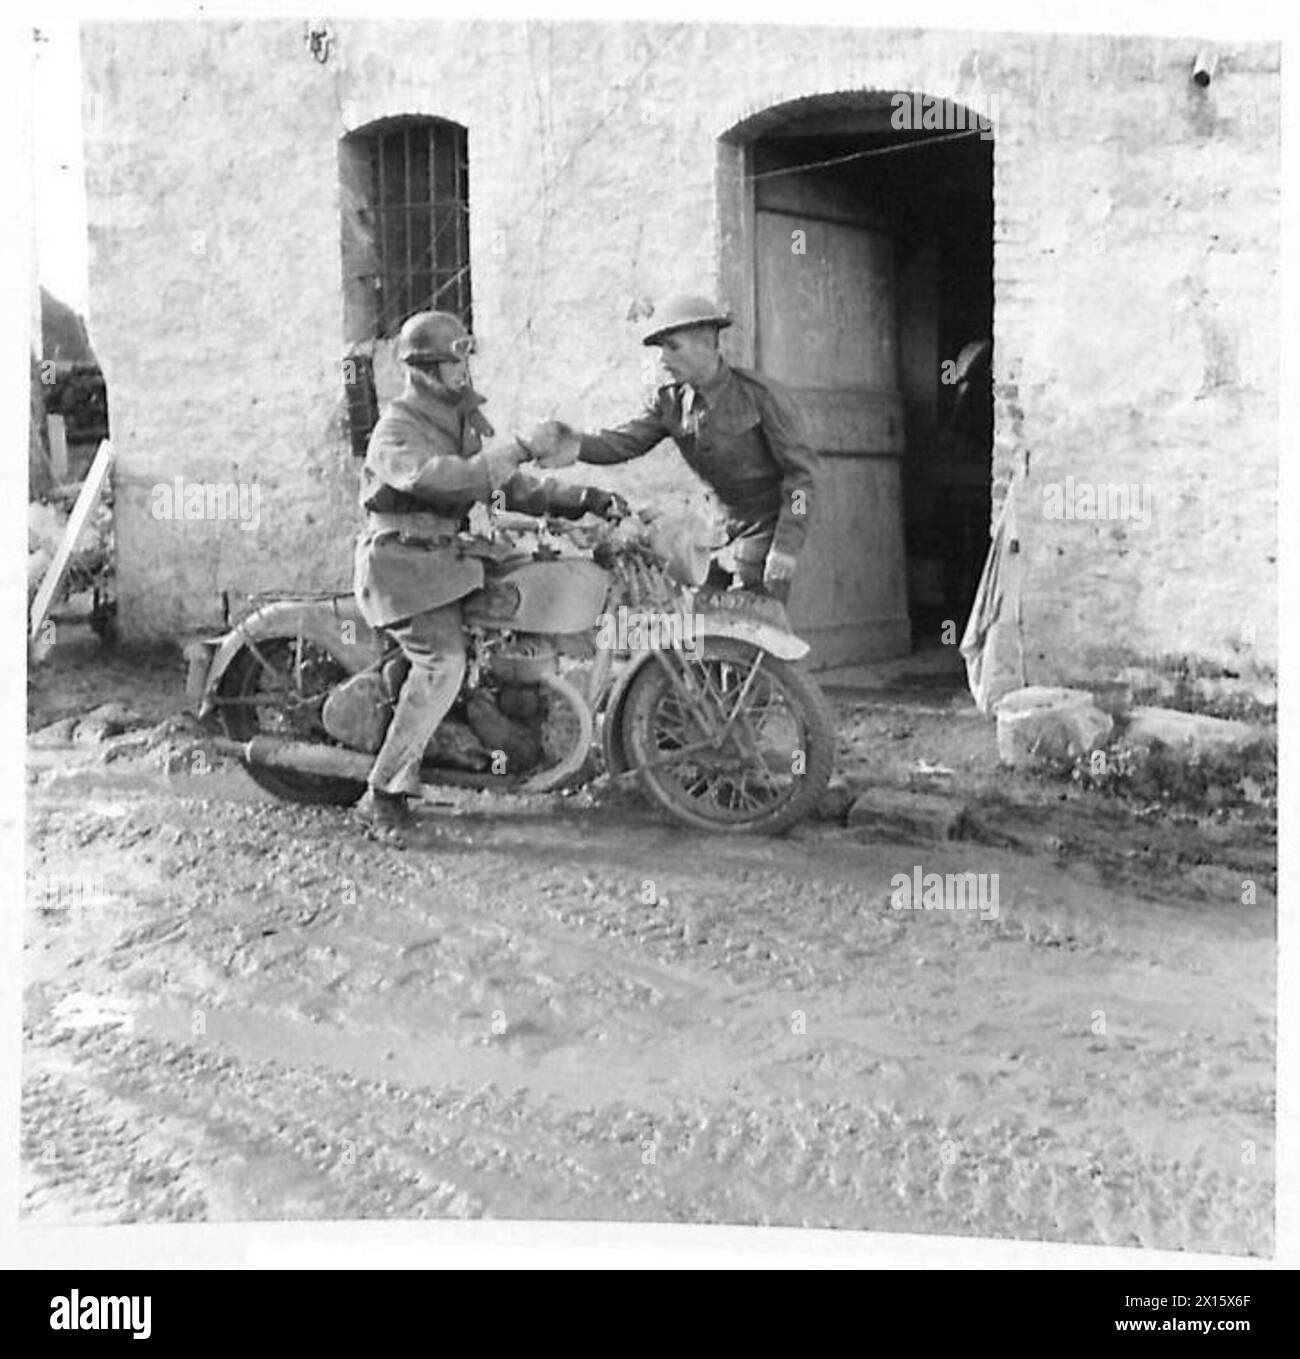 ITALY : EIGHTH ARMY FRONT INTELLIGENCE WORK IN THE FIELD - Sgmn. Bailey of Martin Fordingbridge, a D.R. brings in an urgent message from Divisional HQ, which received by Cpl. Spence of Hyde, Cheshire British Army Stock Photo